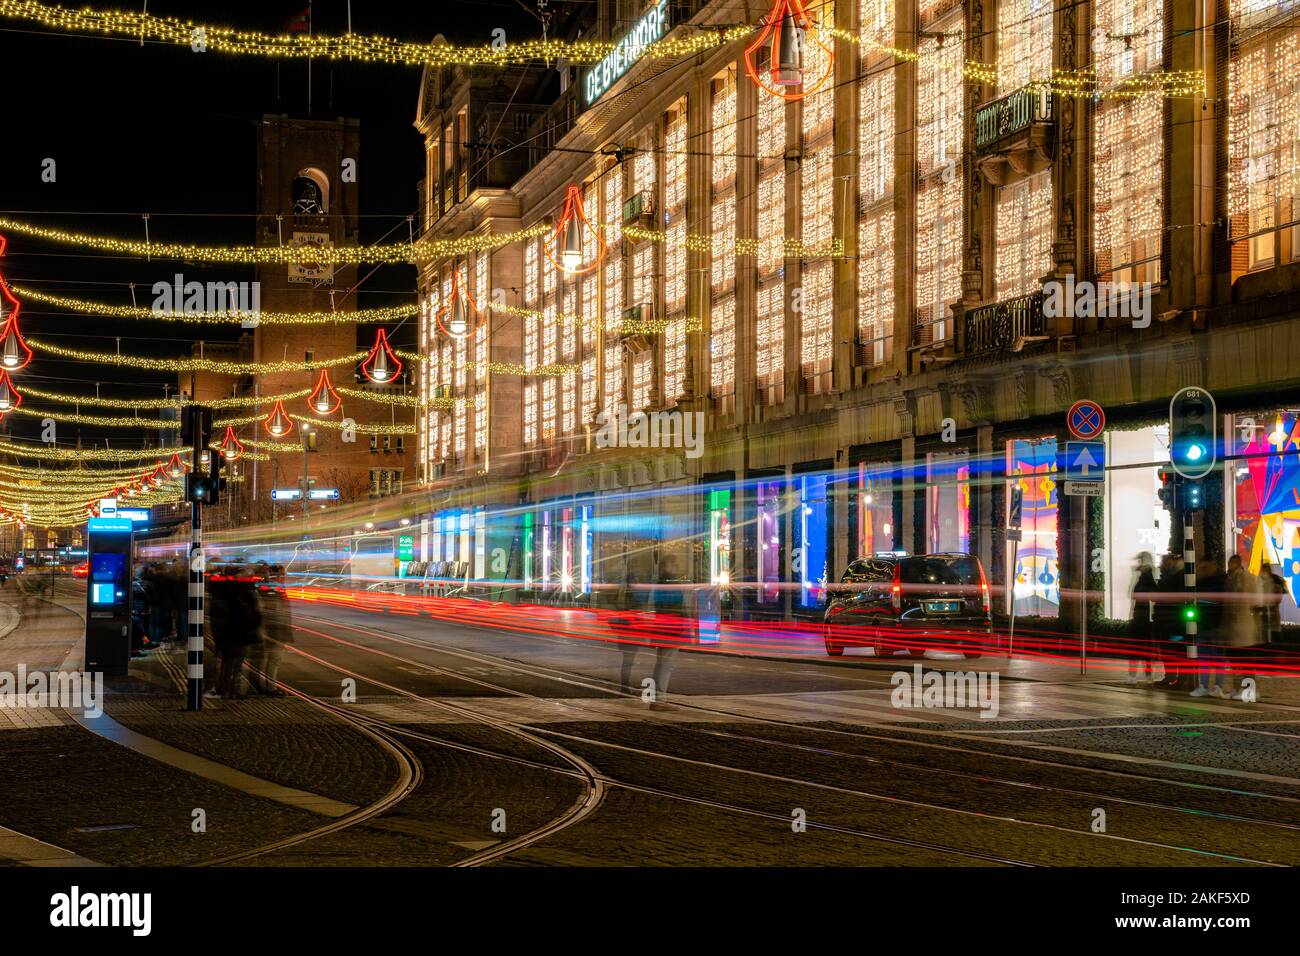 Amsterdam,Netherlands December 23, 2019 : Long exposure light in front of de Bijenkorf shopping mall at night on Dam square in Amsterdam Stock Photo